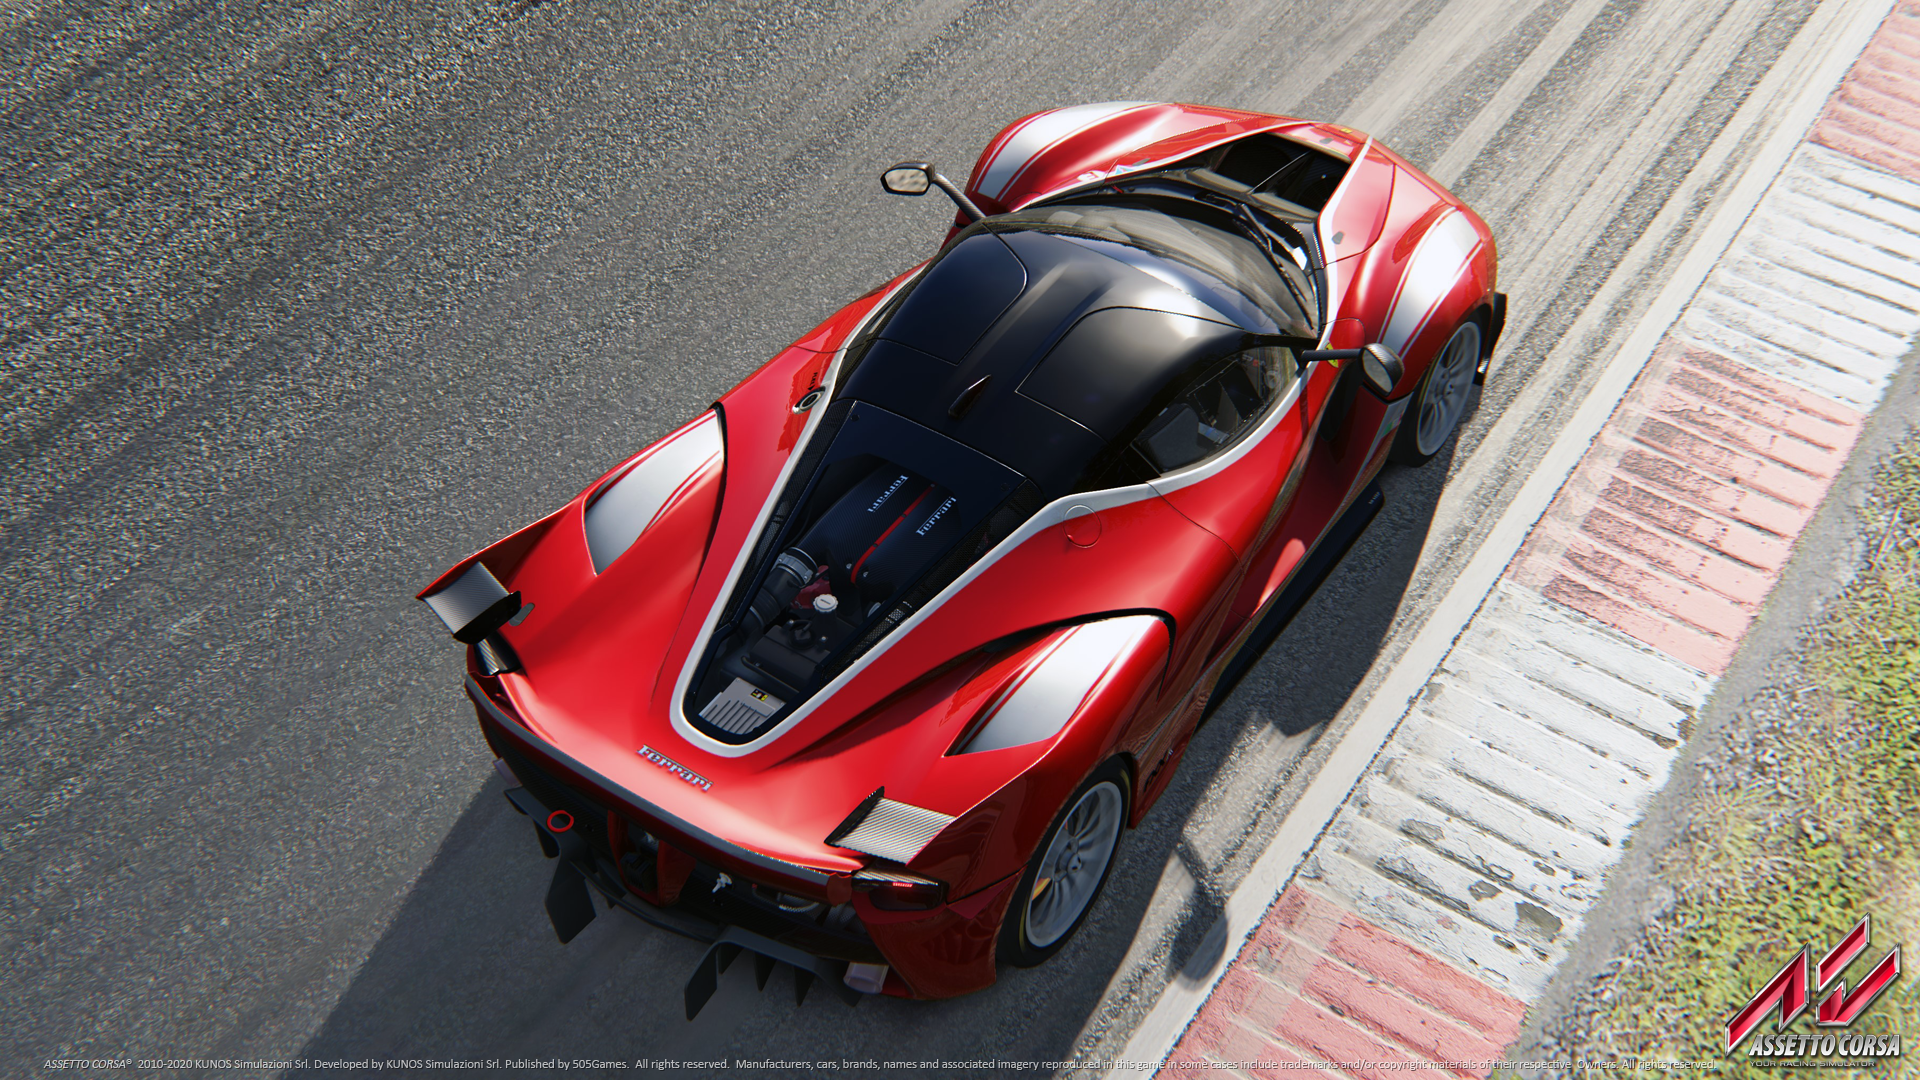 Image for Assetto Corsa delayed on PS4 and Xbox One